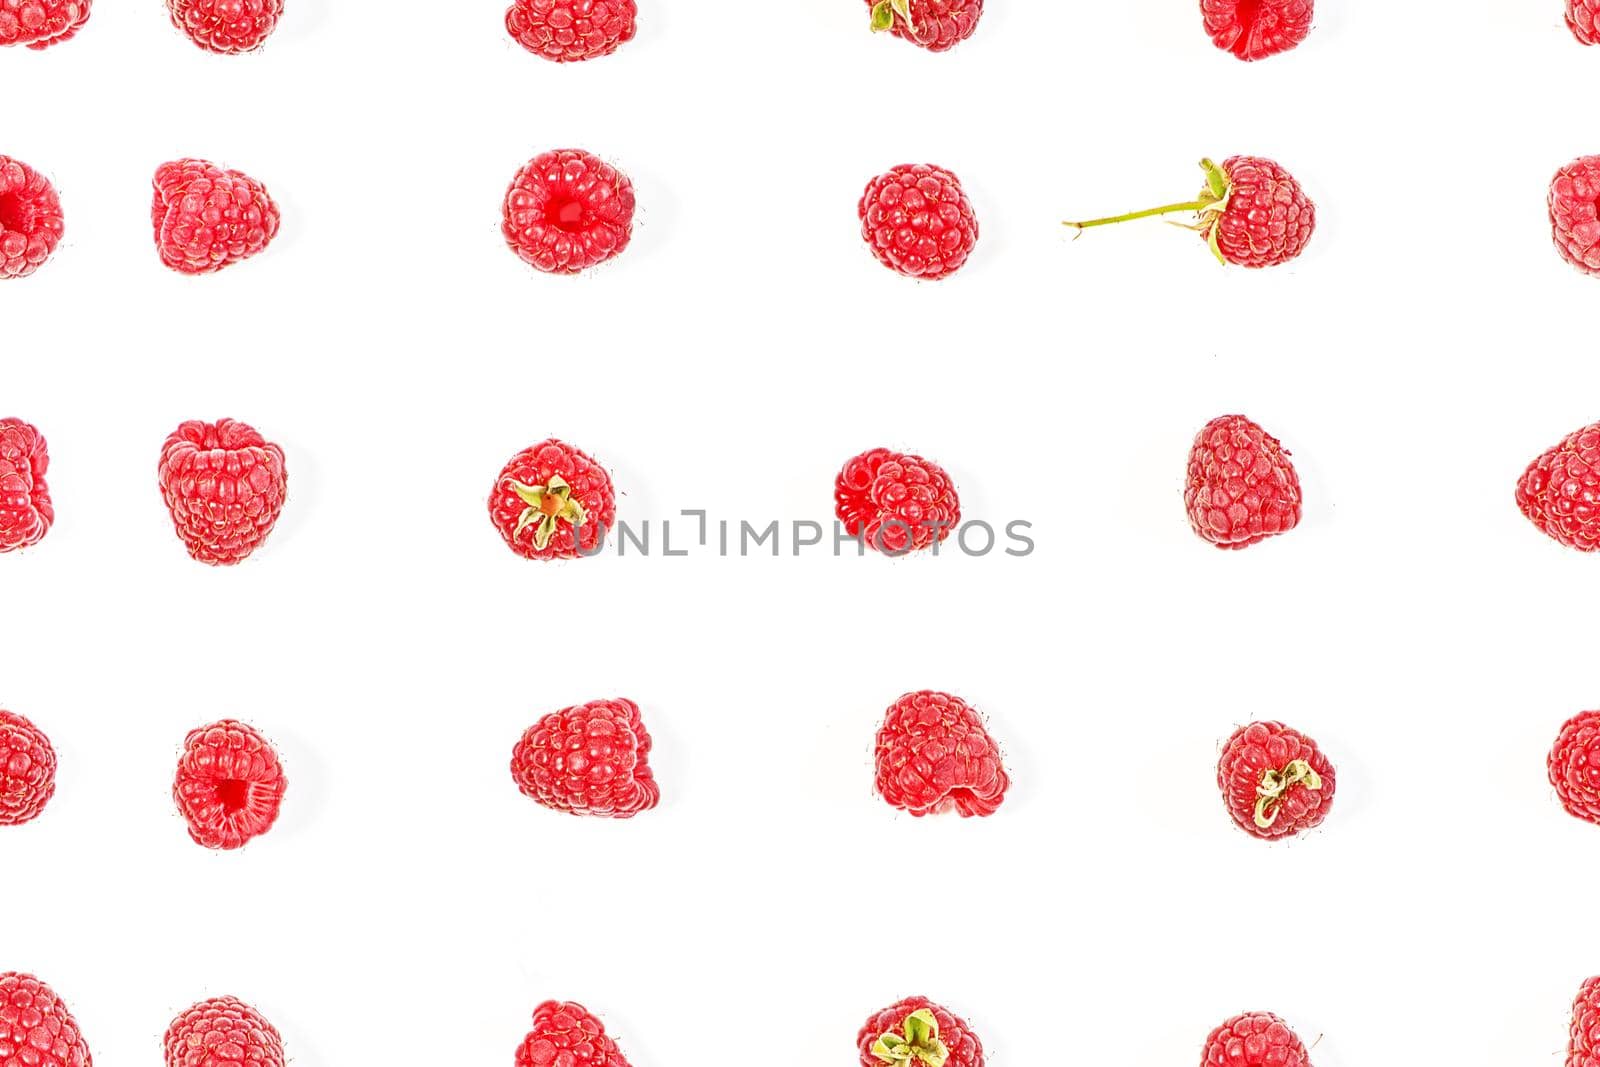 A pattern of ripe red raspberries laid out in lines on a white background in various poses. View from above